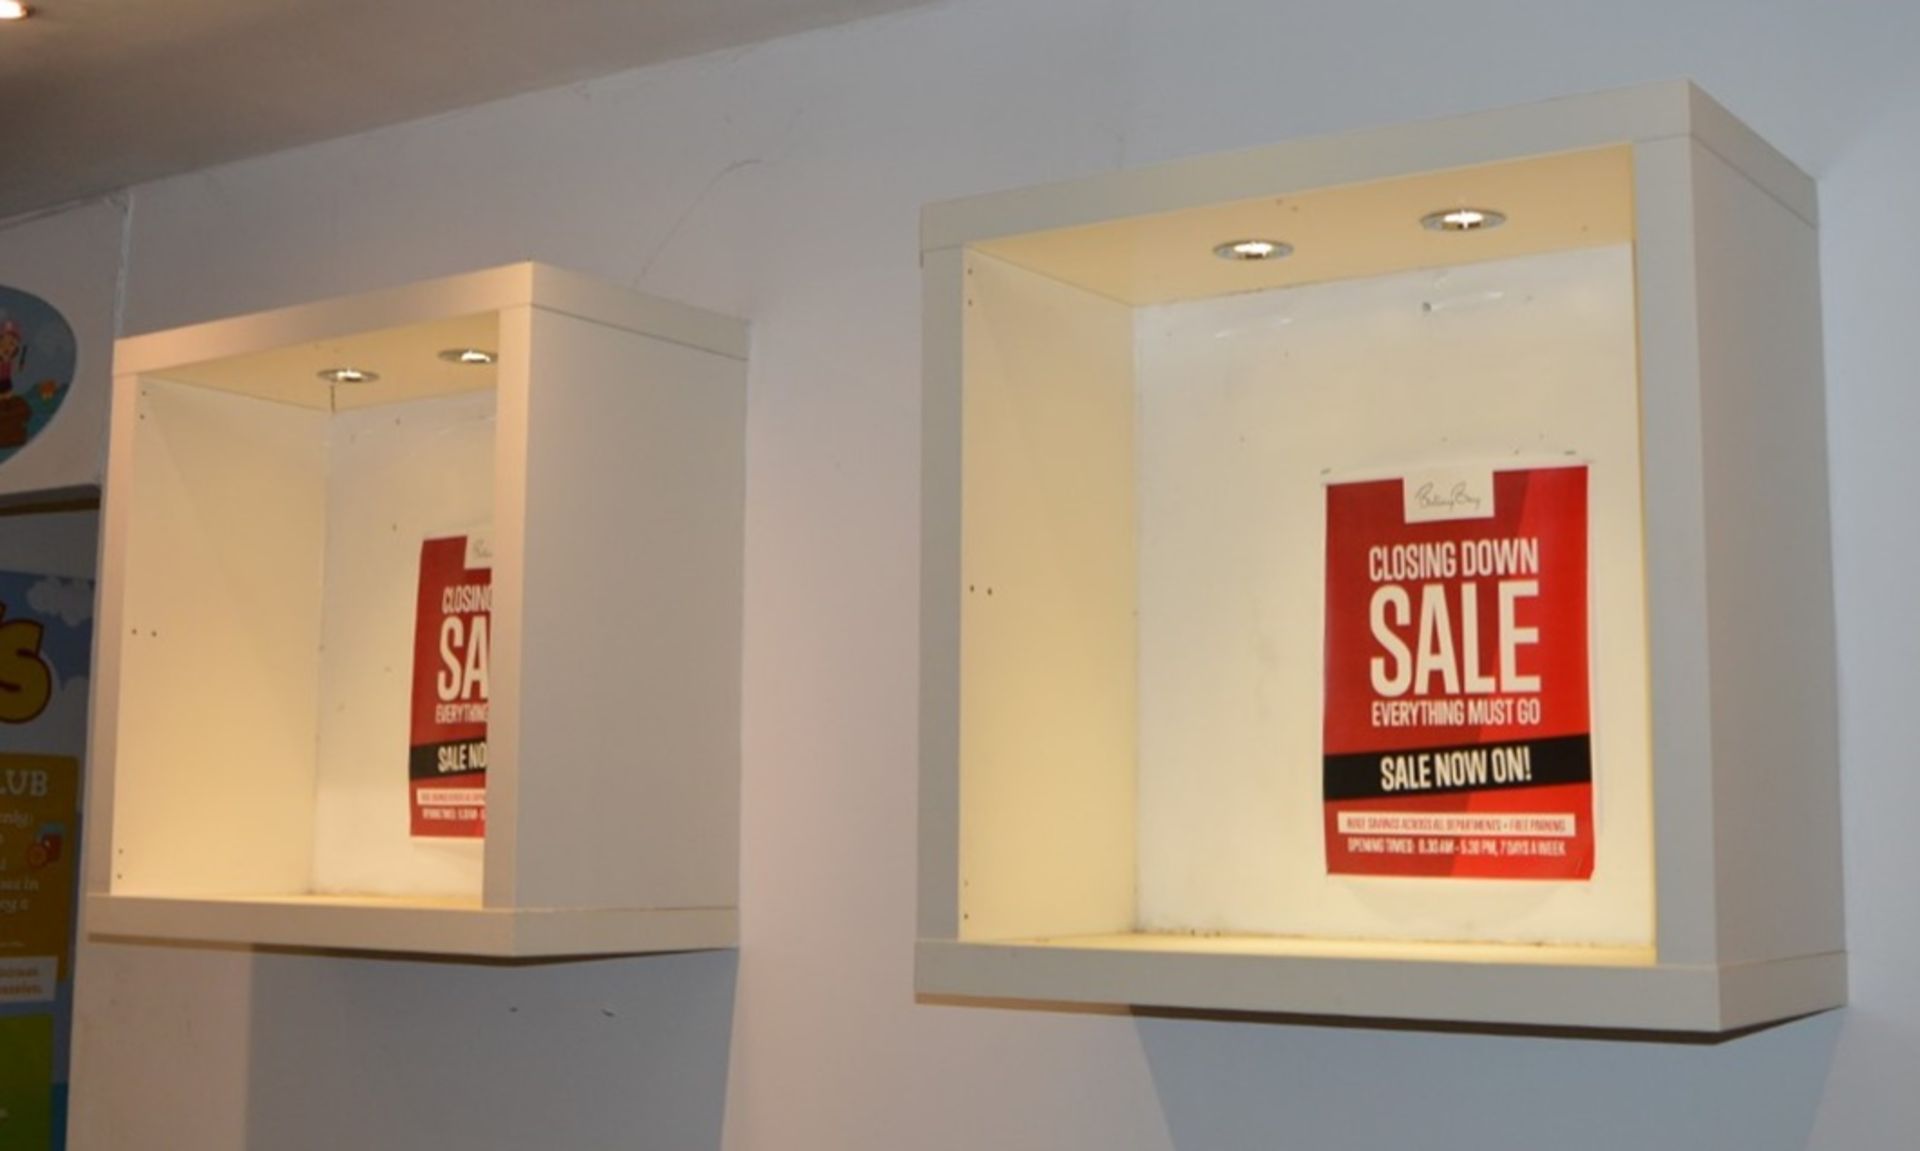 12 x White Gloss Illuminated Wall Display Units - Sizes Include 79 x 79 x 40 cms and 149 x 79 x 40